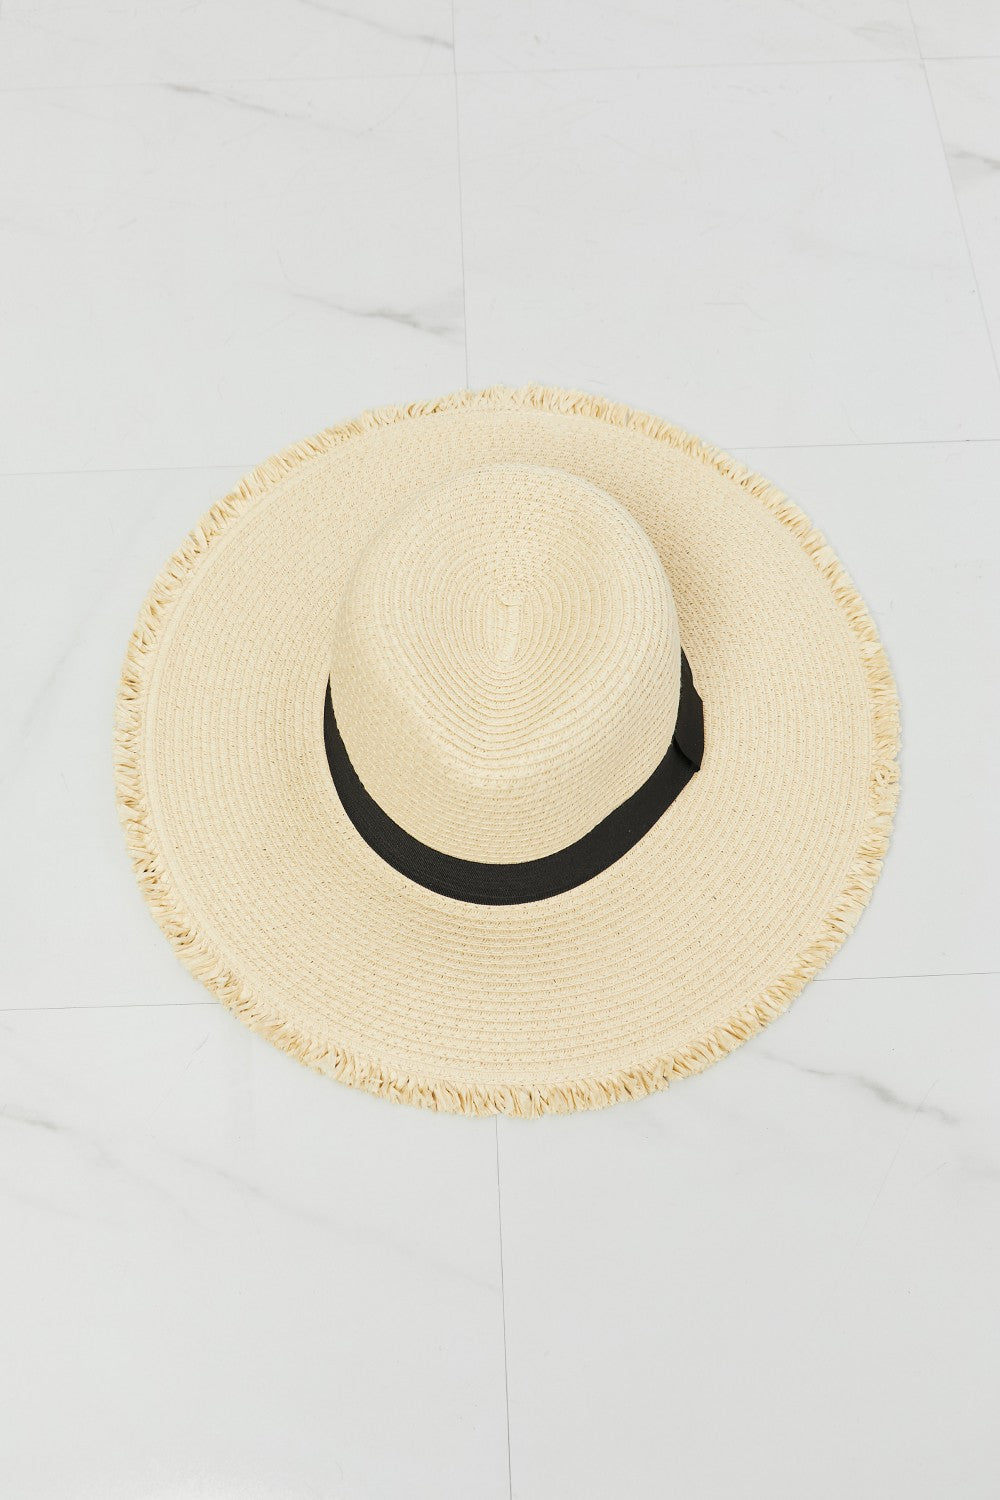 - Fame Time For The Sun Straw Hat - Ships from The US - hat at TFC&H Co.